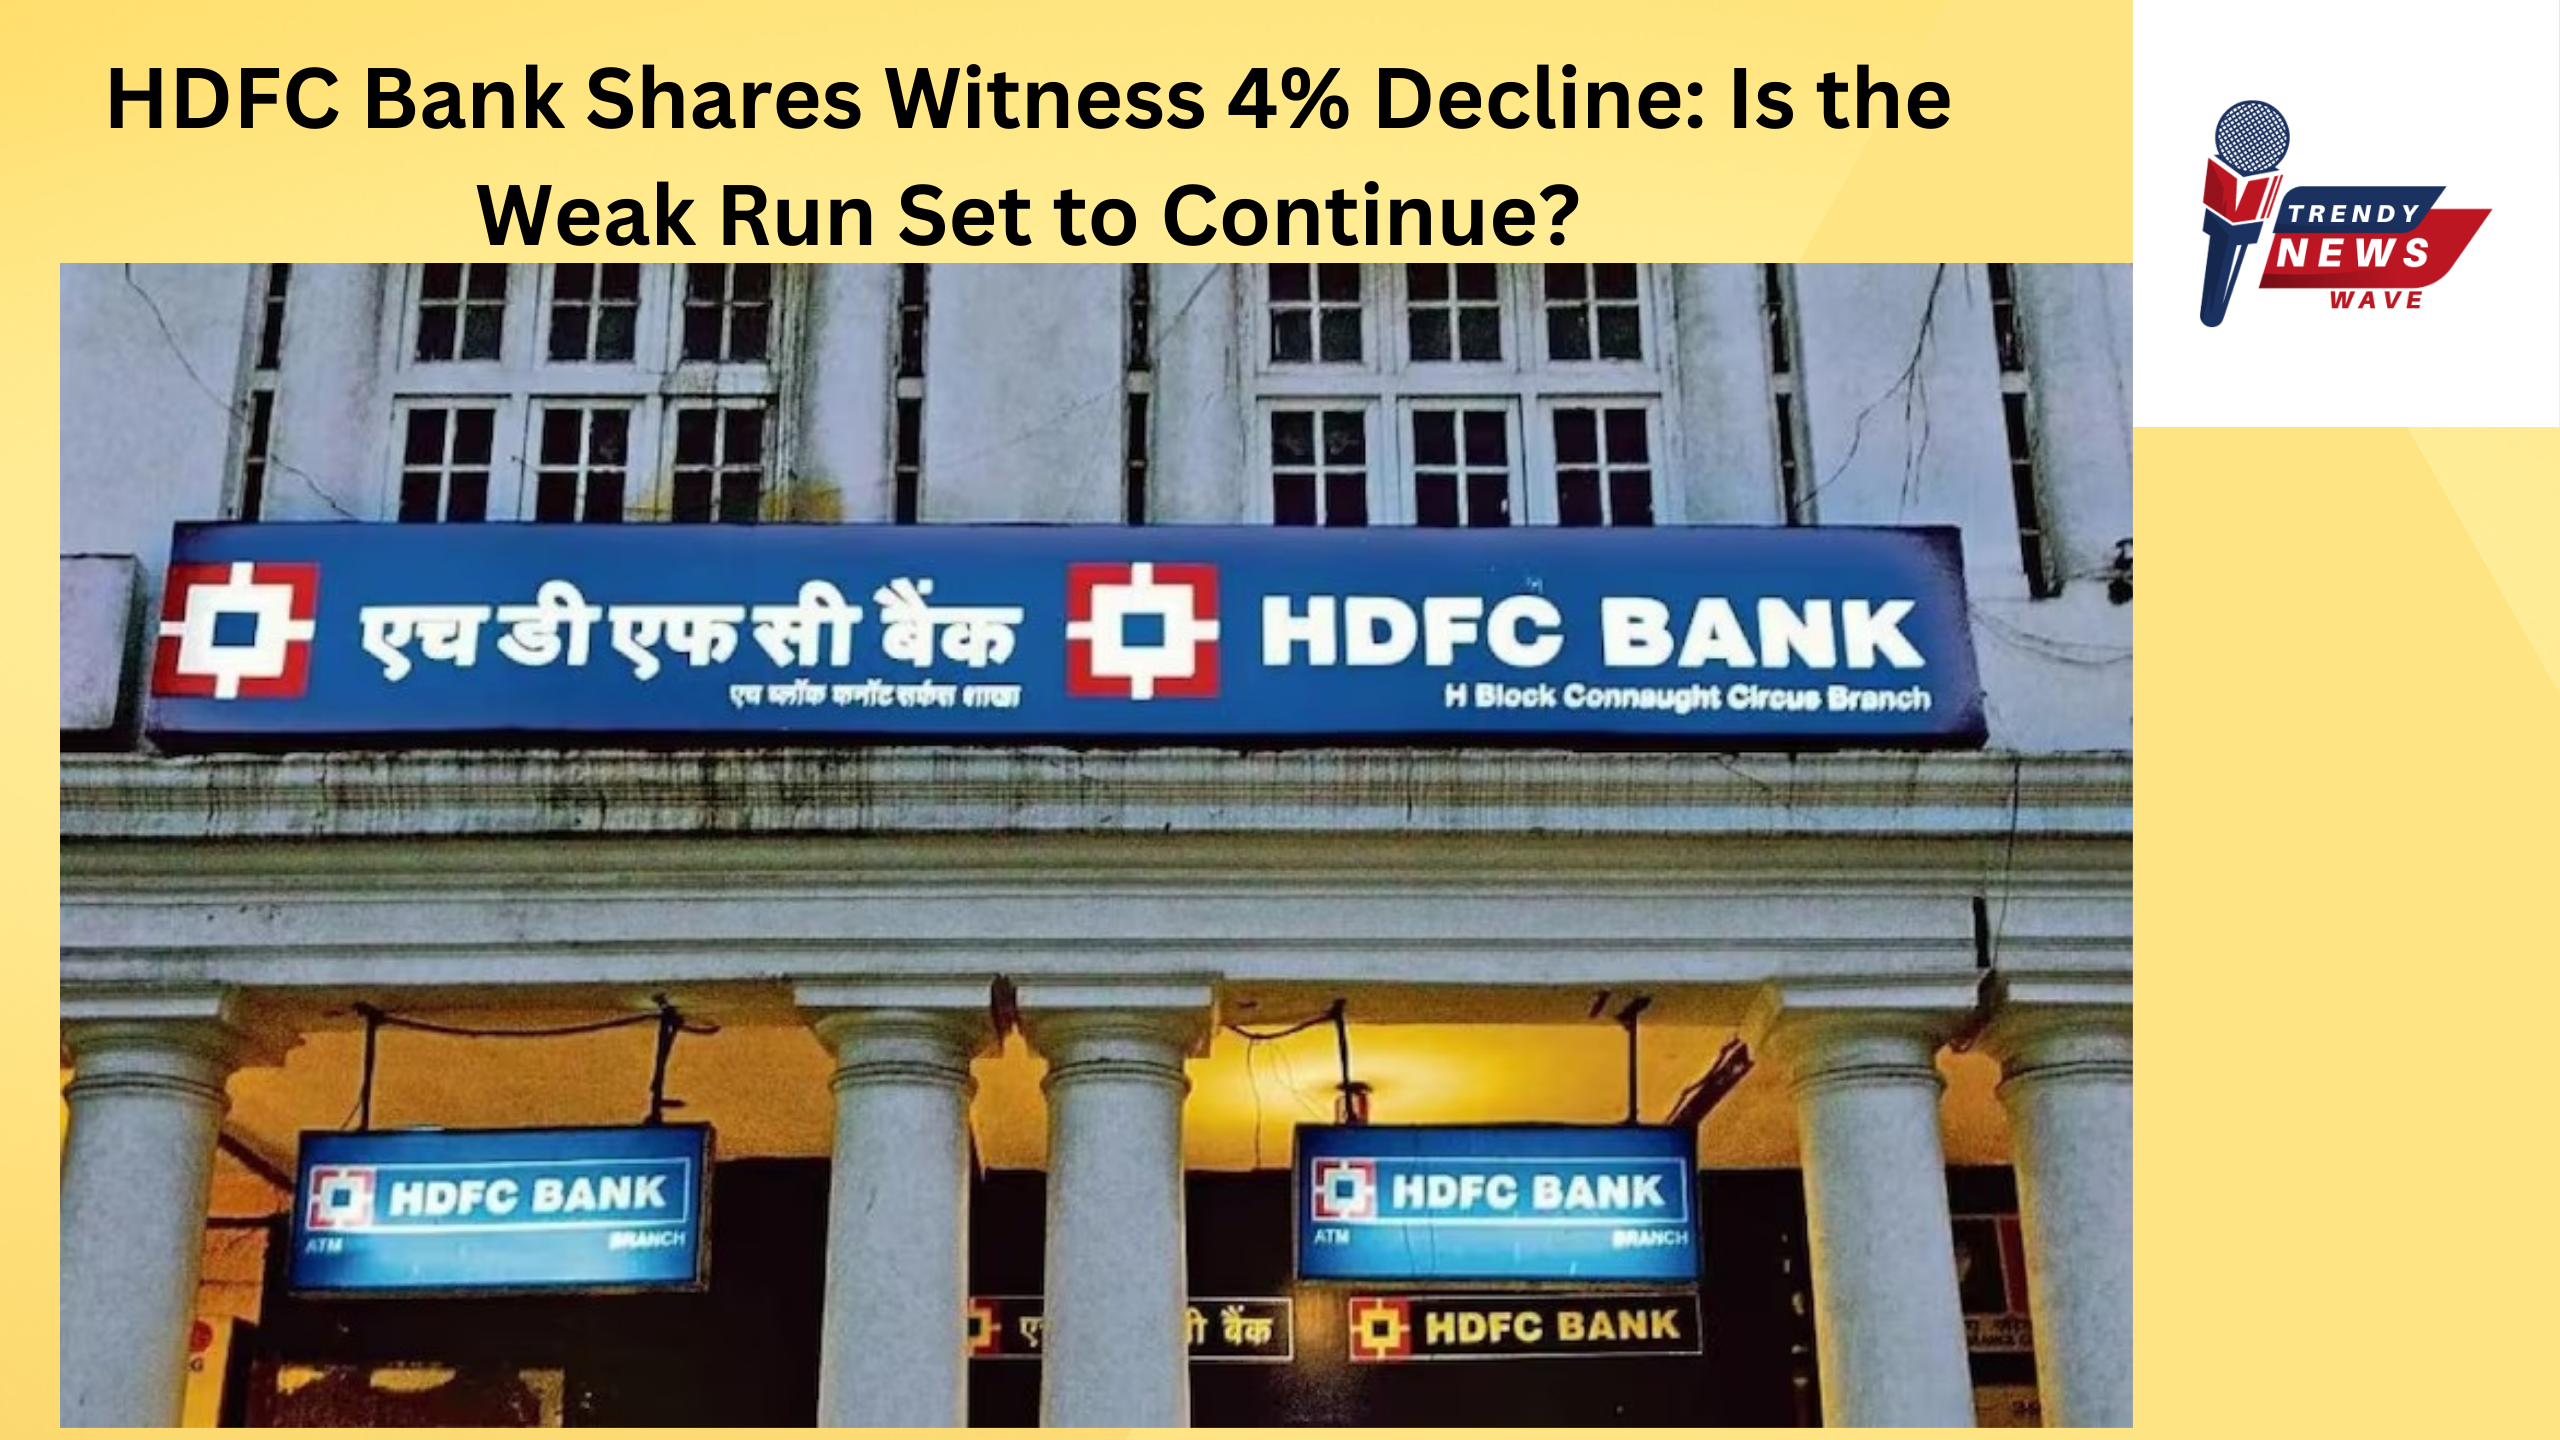 HDFC Bank Shares Witness 4% Decline: Is the Weak Run Set to Continue?